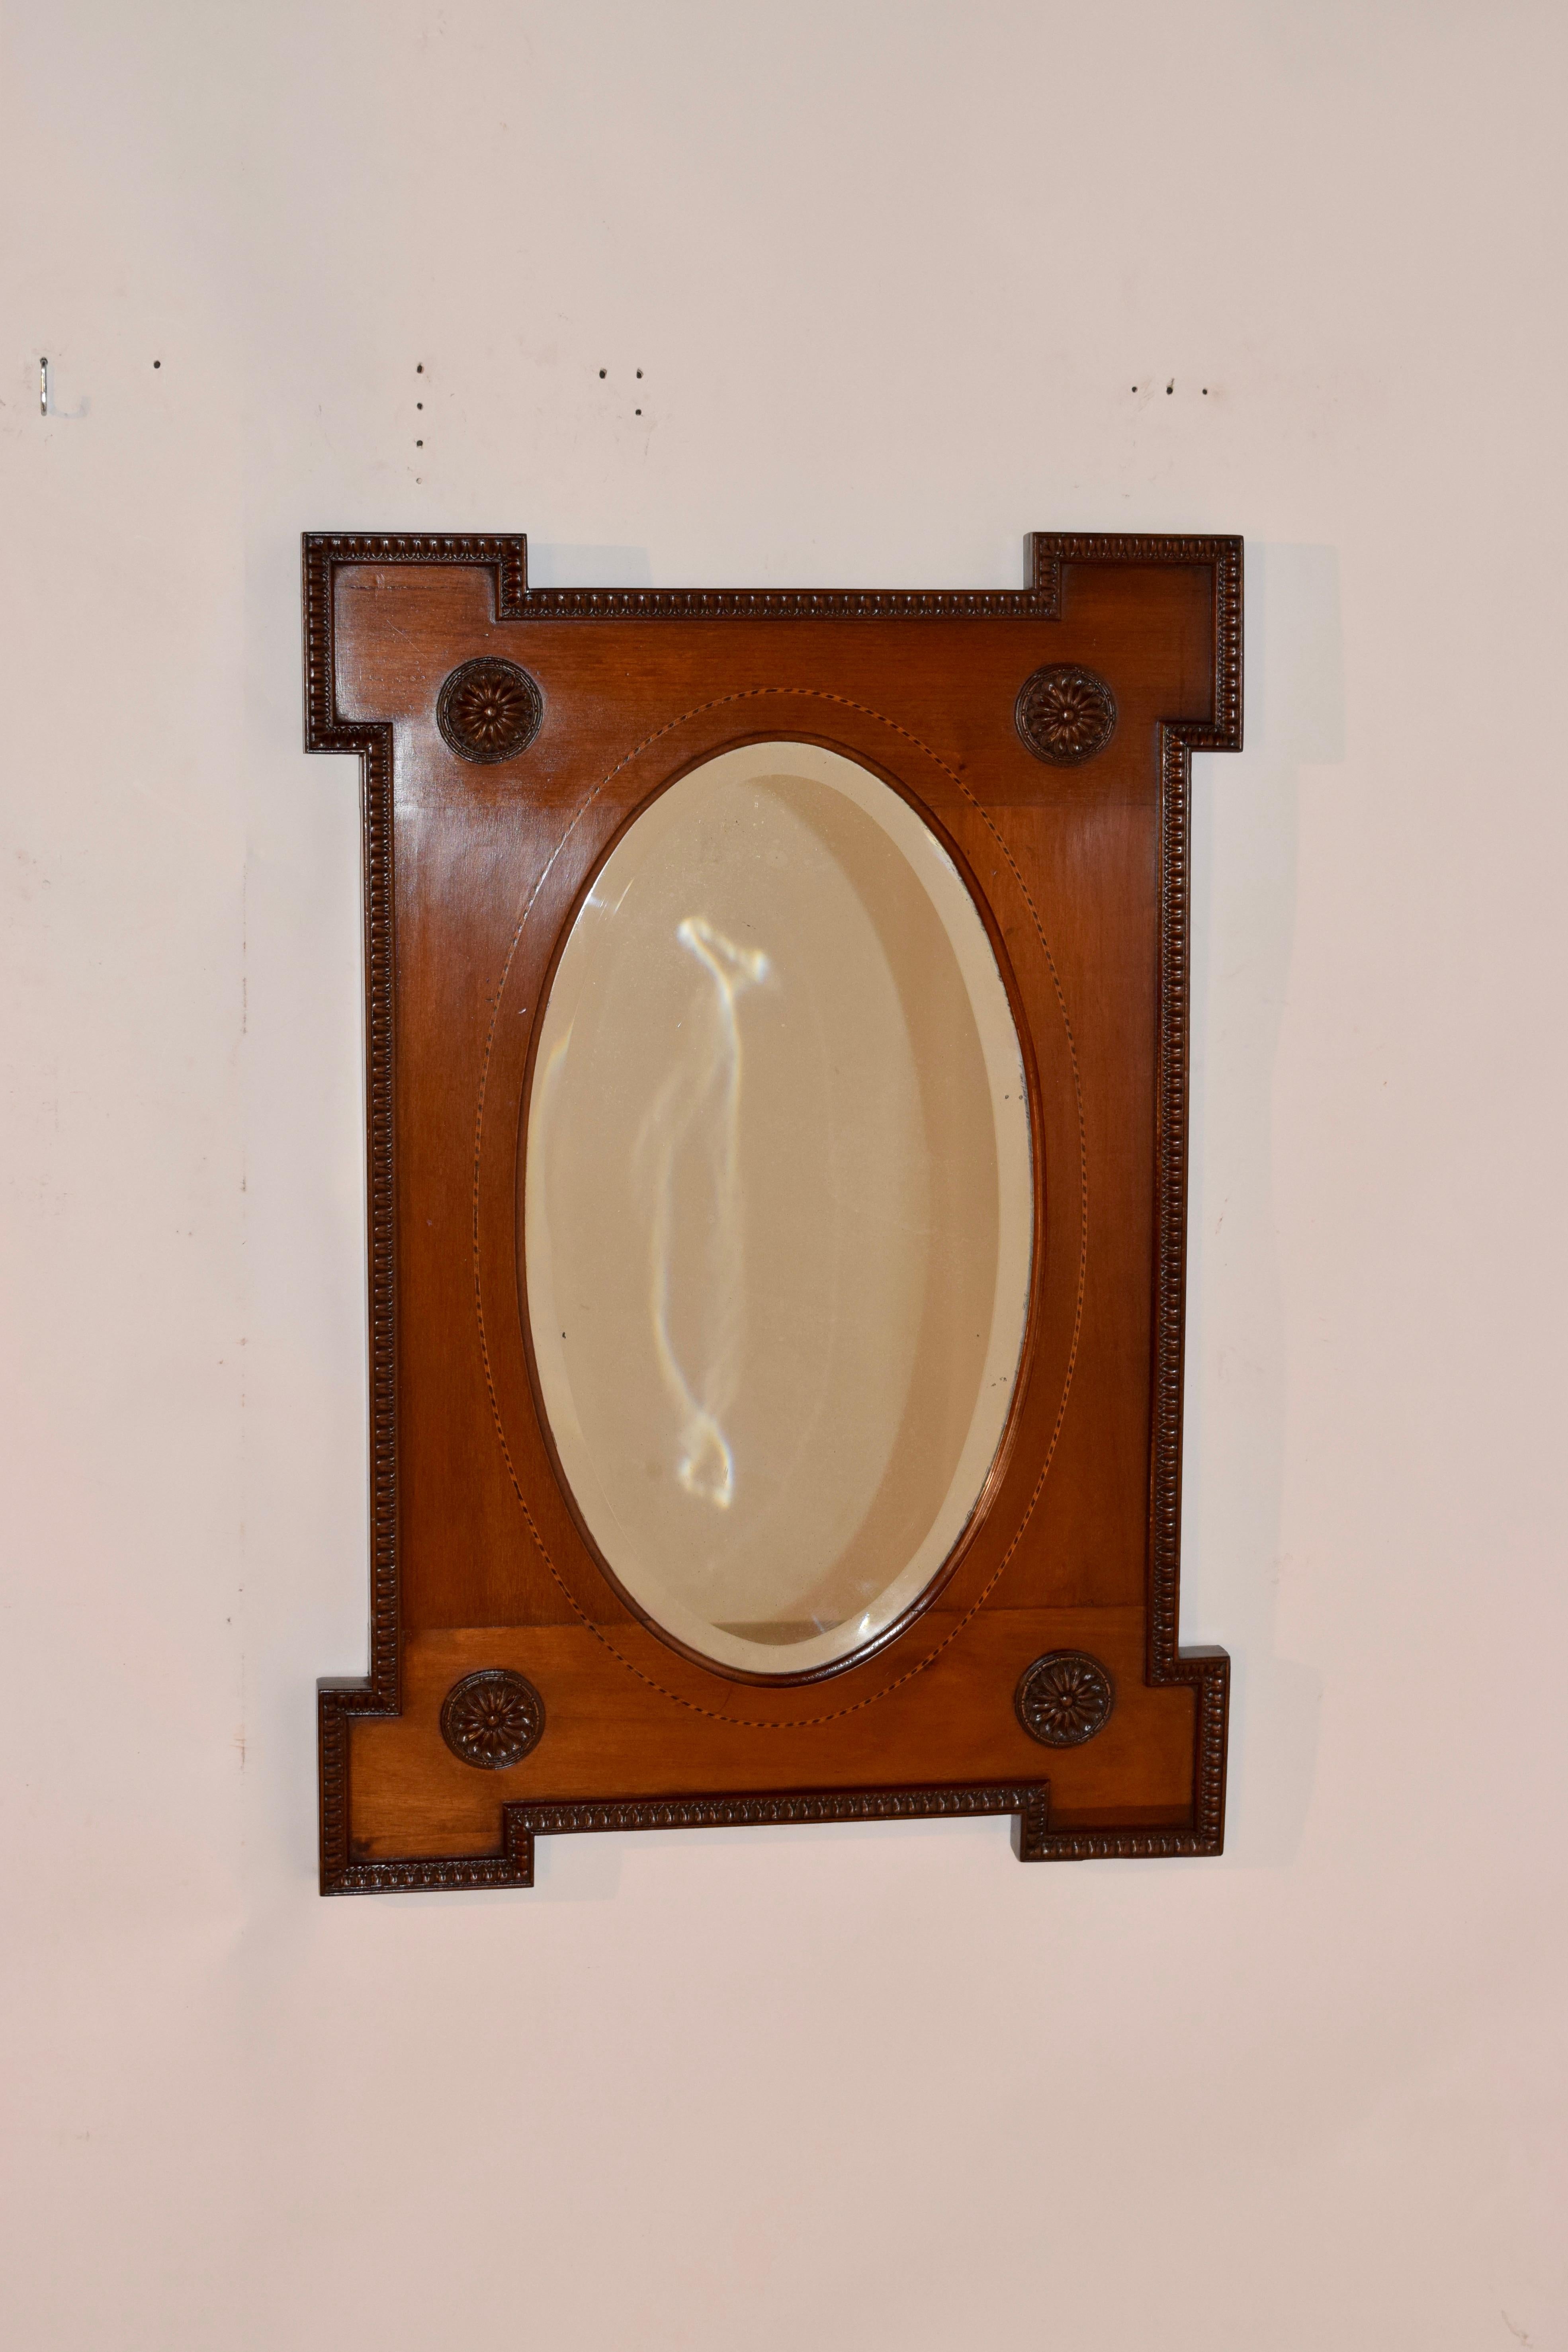 19th century English mirror made from mahogany. The mirror frame has a wonderfully hand carved molded edge, surrounding the oval beveled mirror, which has a banding of satinwood and ebony barber pole inlay. There are hand carved rosettes adorning